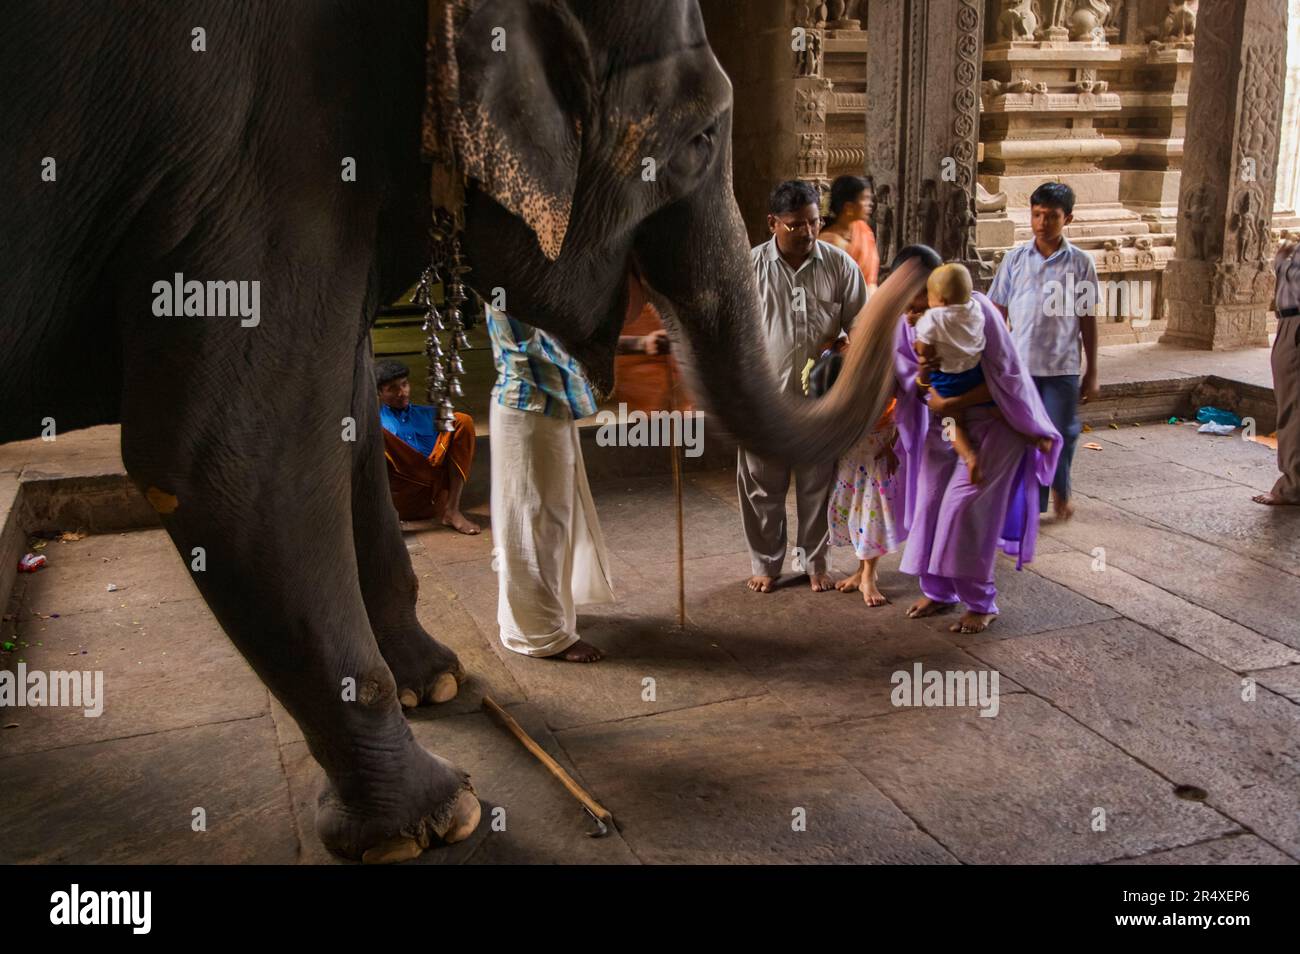 An elephant bestows blessings on visitors at the Meenakshi Temple. Stock Photo